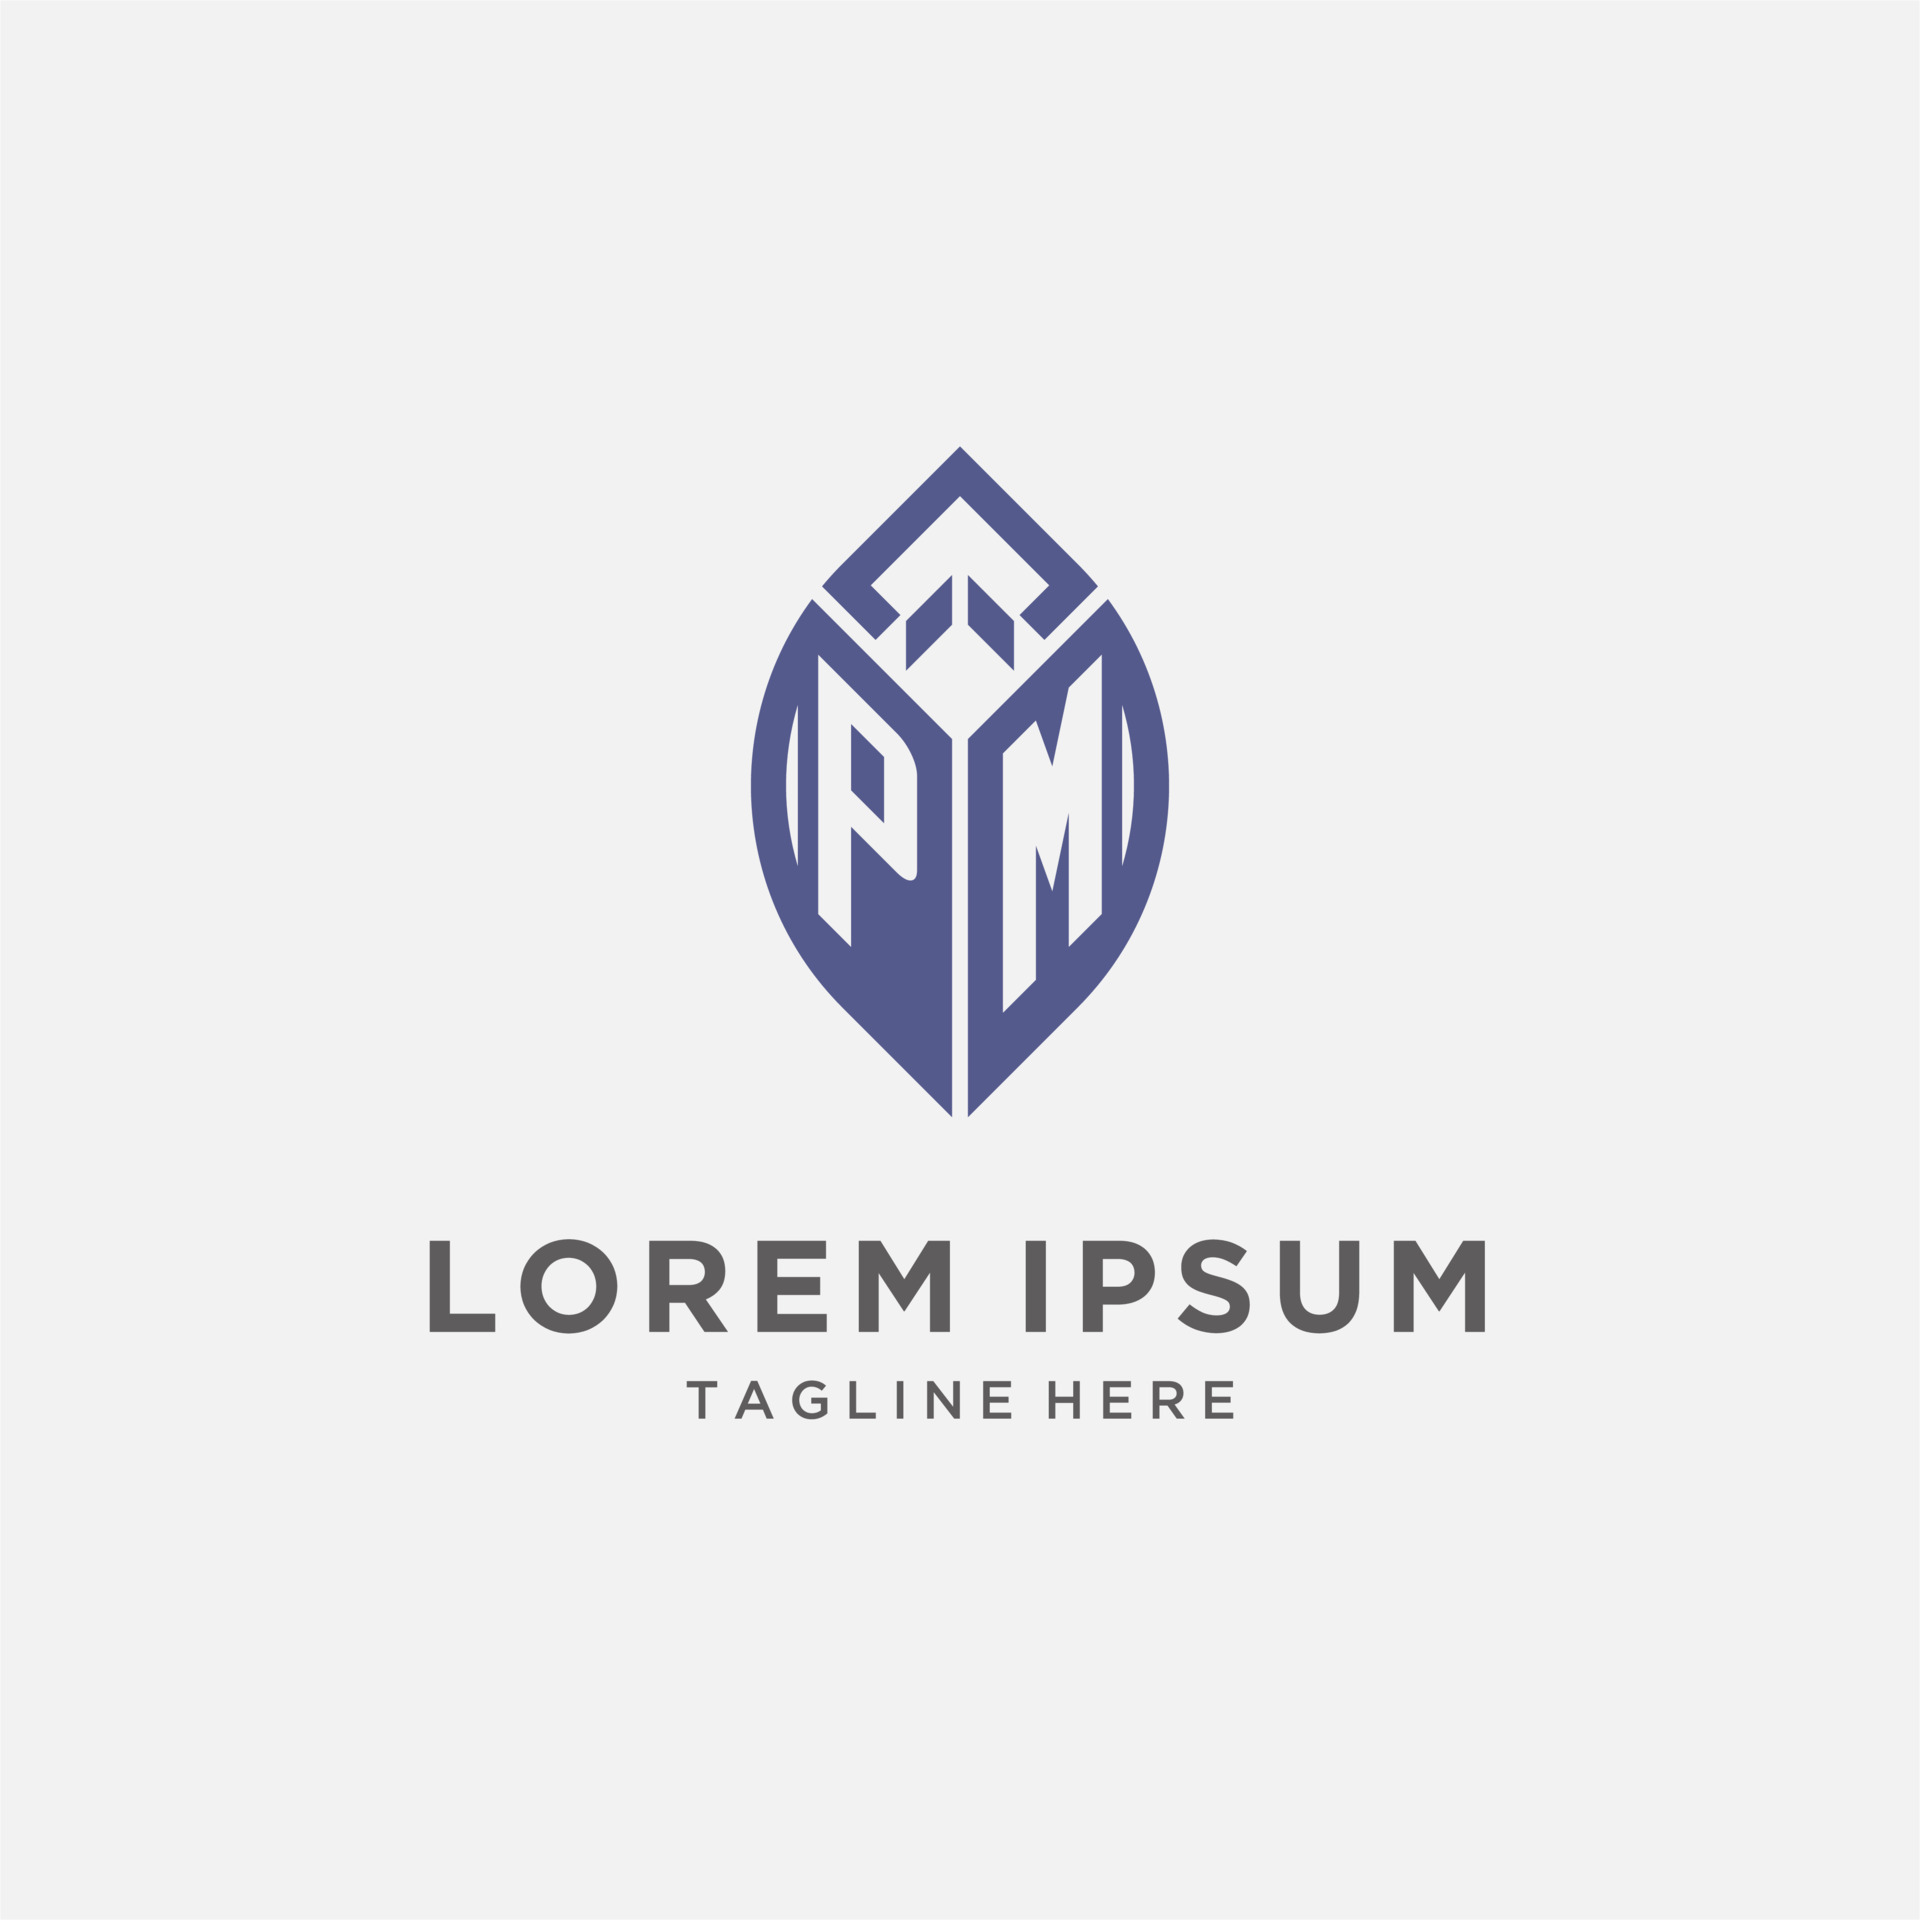 PM logo with leaf shape, clean and modern monogram initial logo